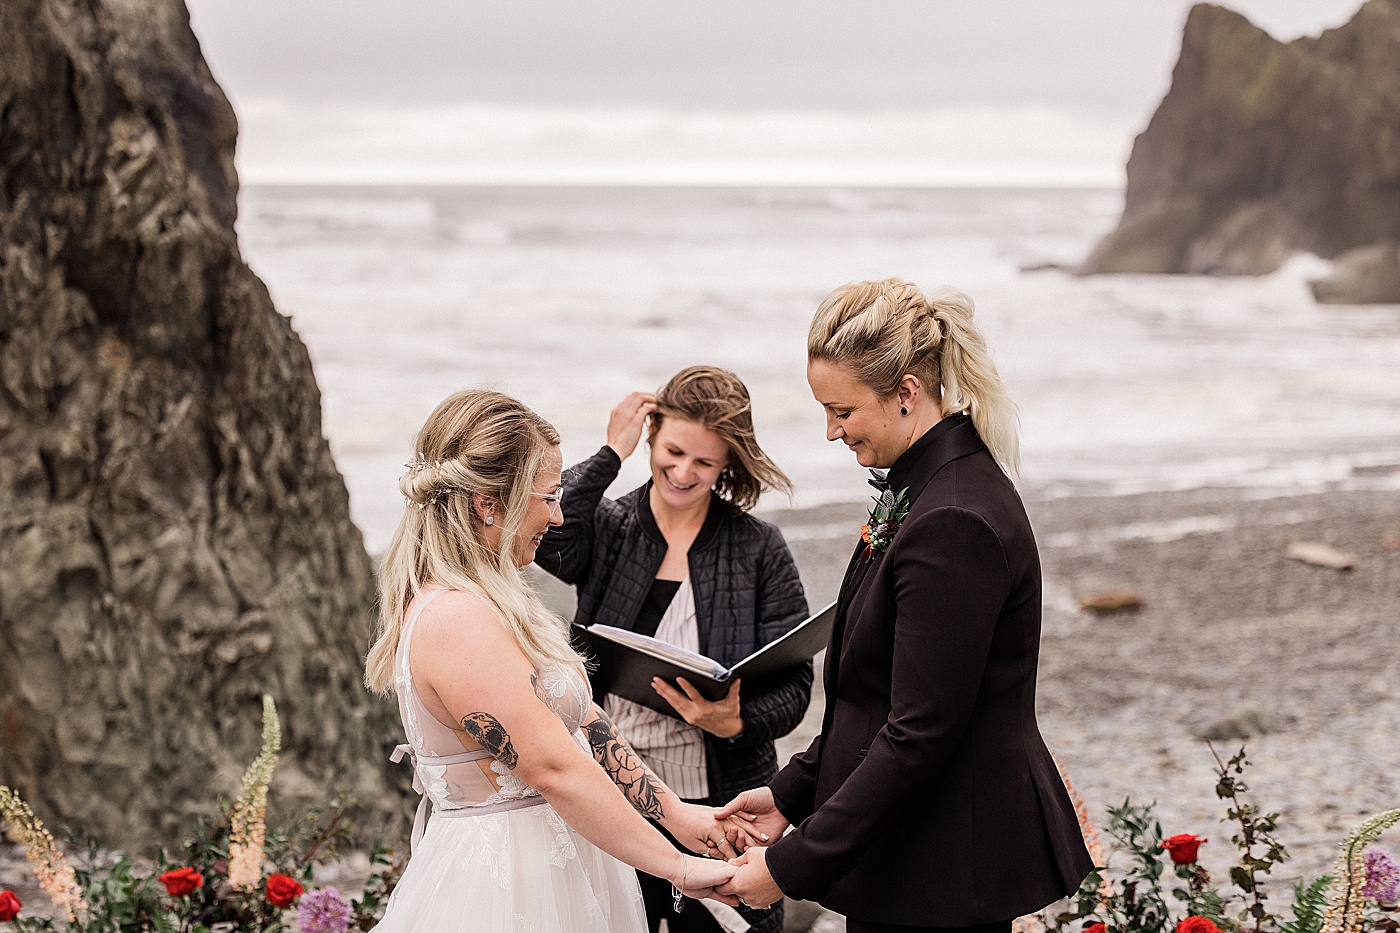 Same-sex elopement at Ruby Beach | Photo by Megan Montalvo Photography.